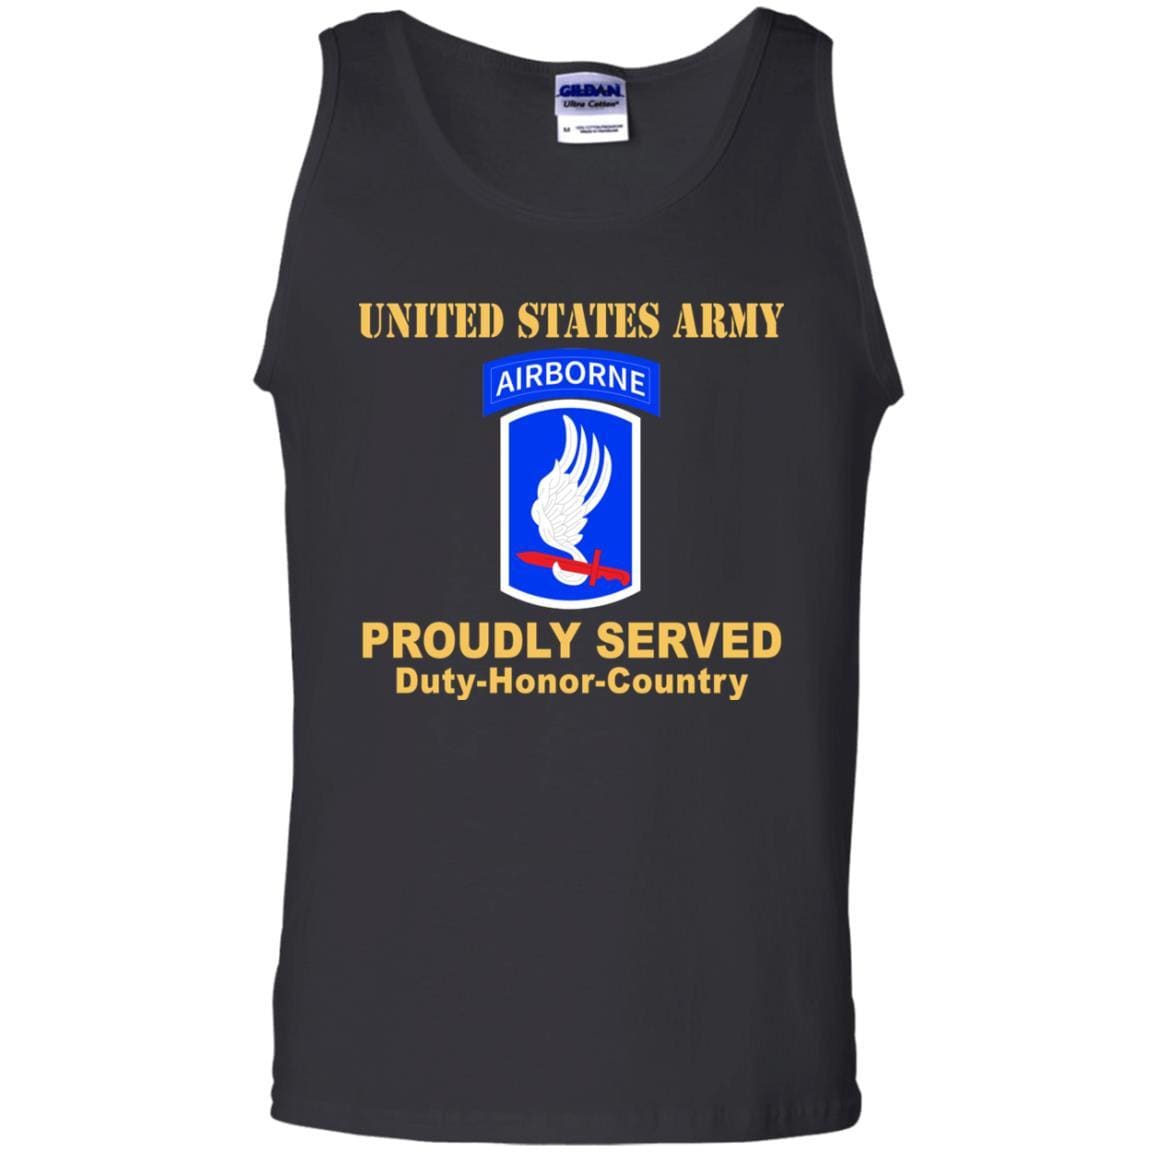 US ARMY 173RD AIRBORNE BRIGADE- Proudly Served T-Shirt On Front For Men-TShirt-Army-Veterans Nation